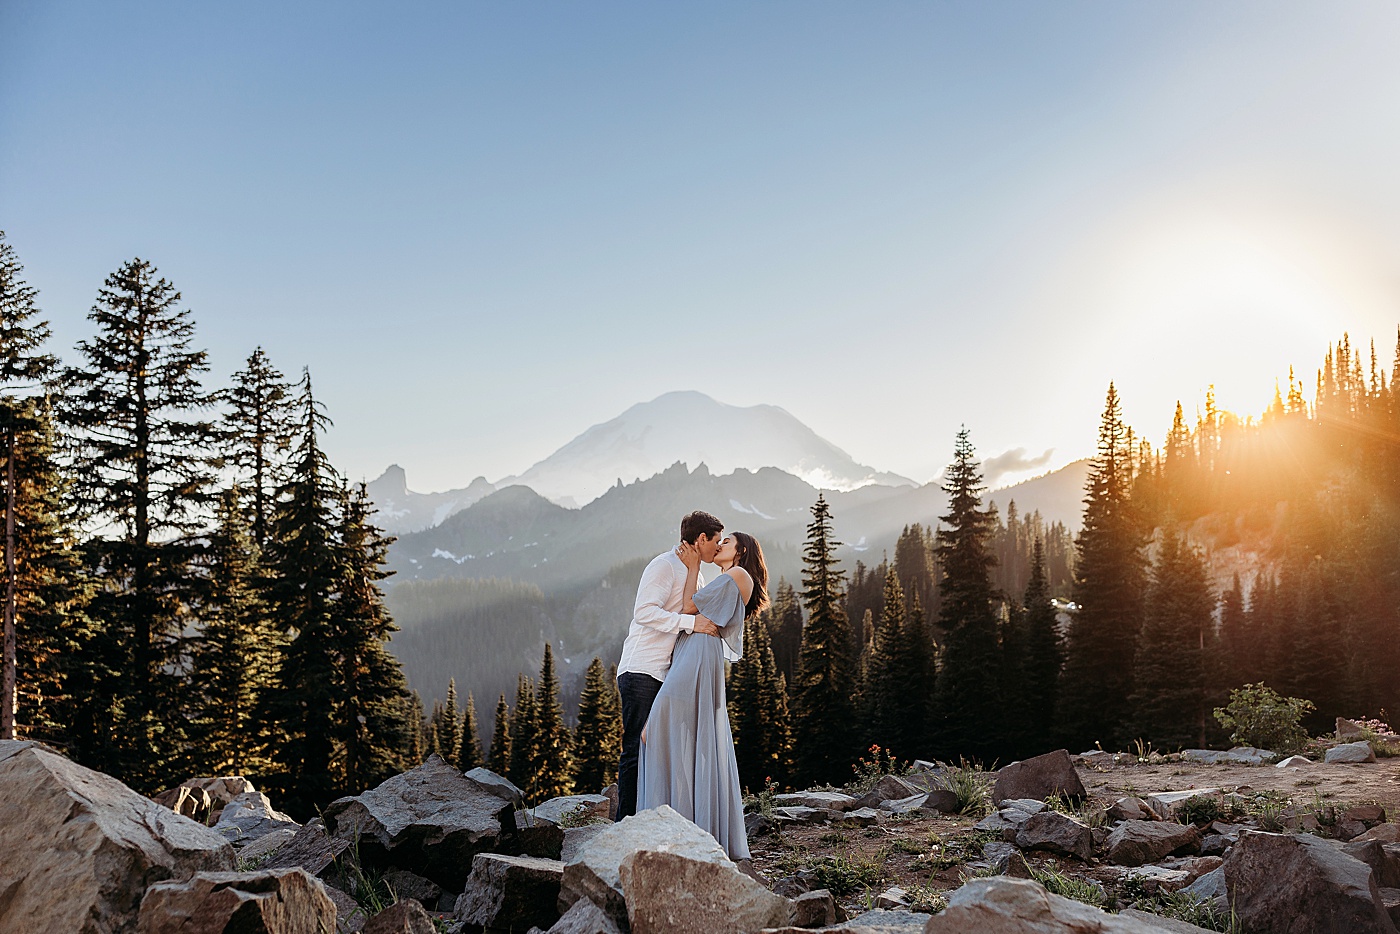 Couple kissing during engagement session at Mt. Rainier | Photo by Megan Montalvo Photography